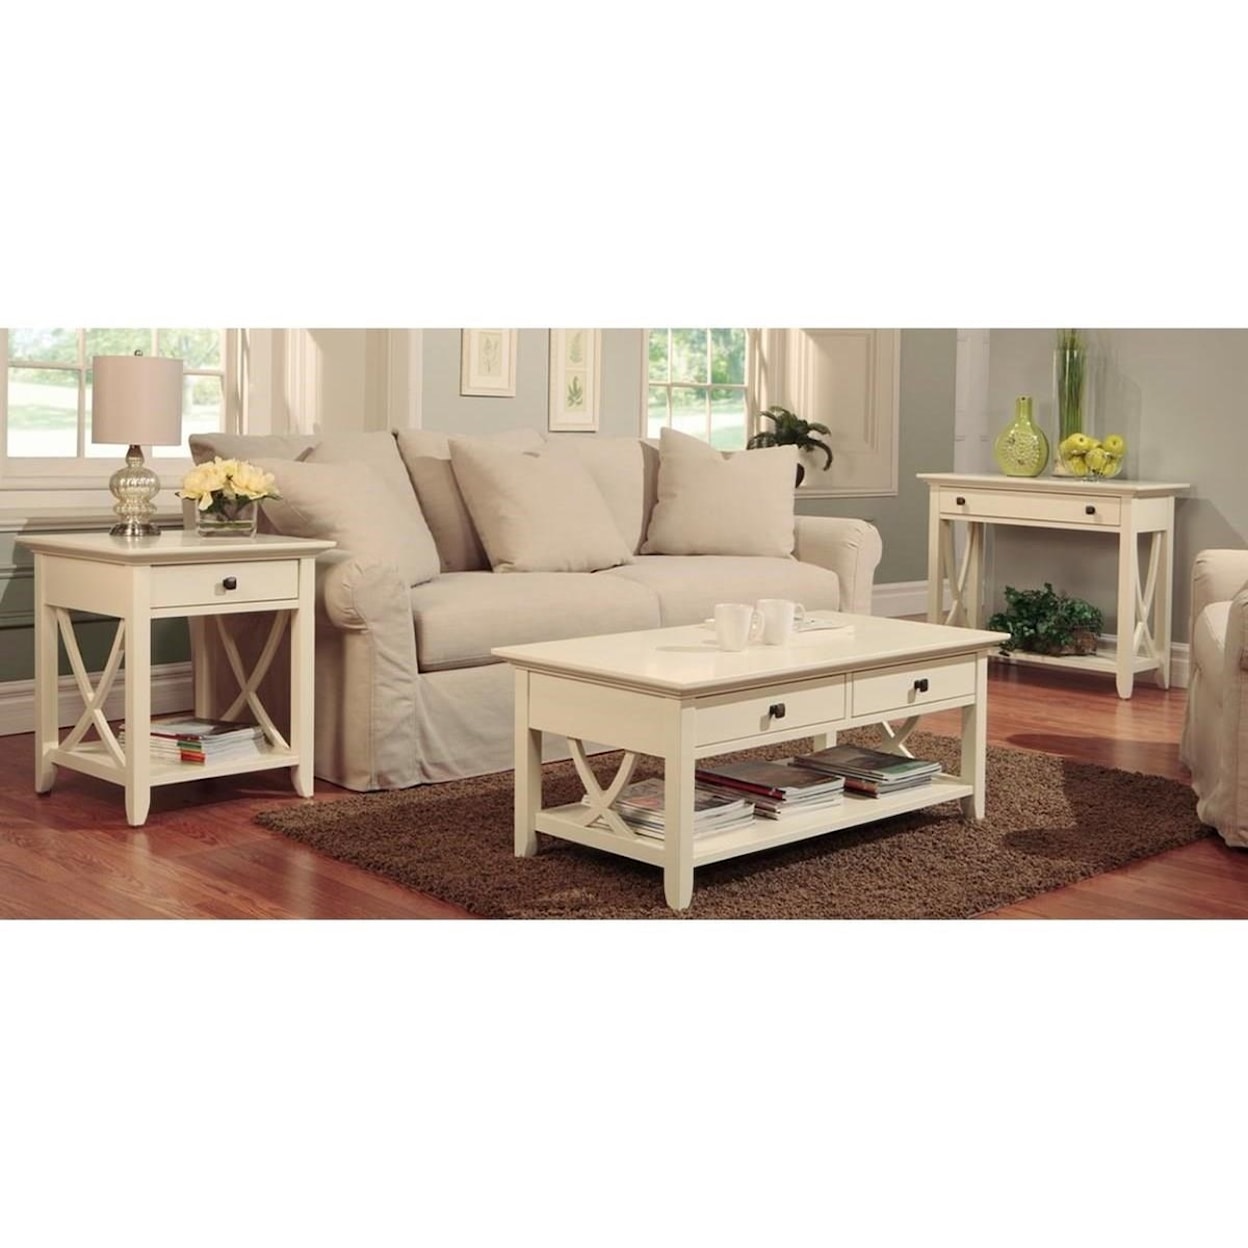 Handstone Florence End Table